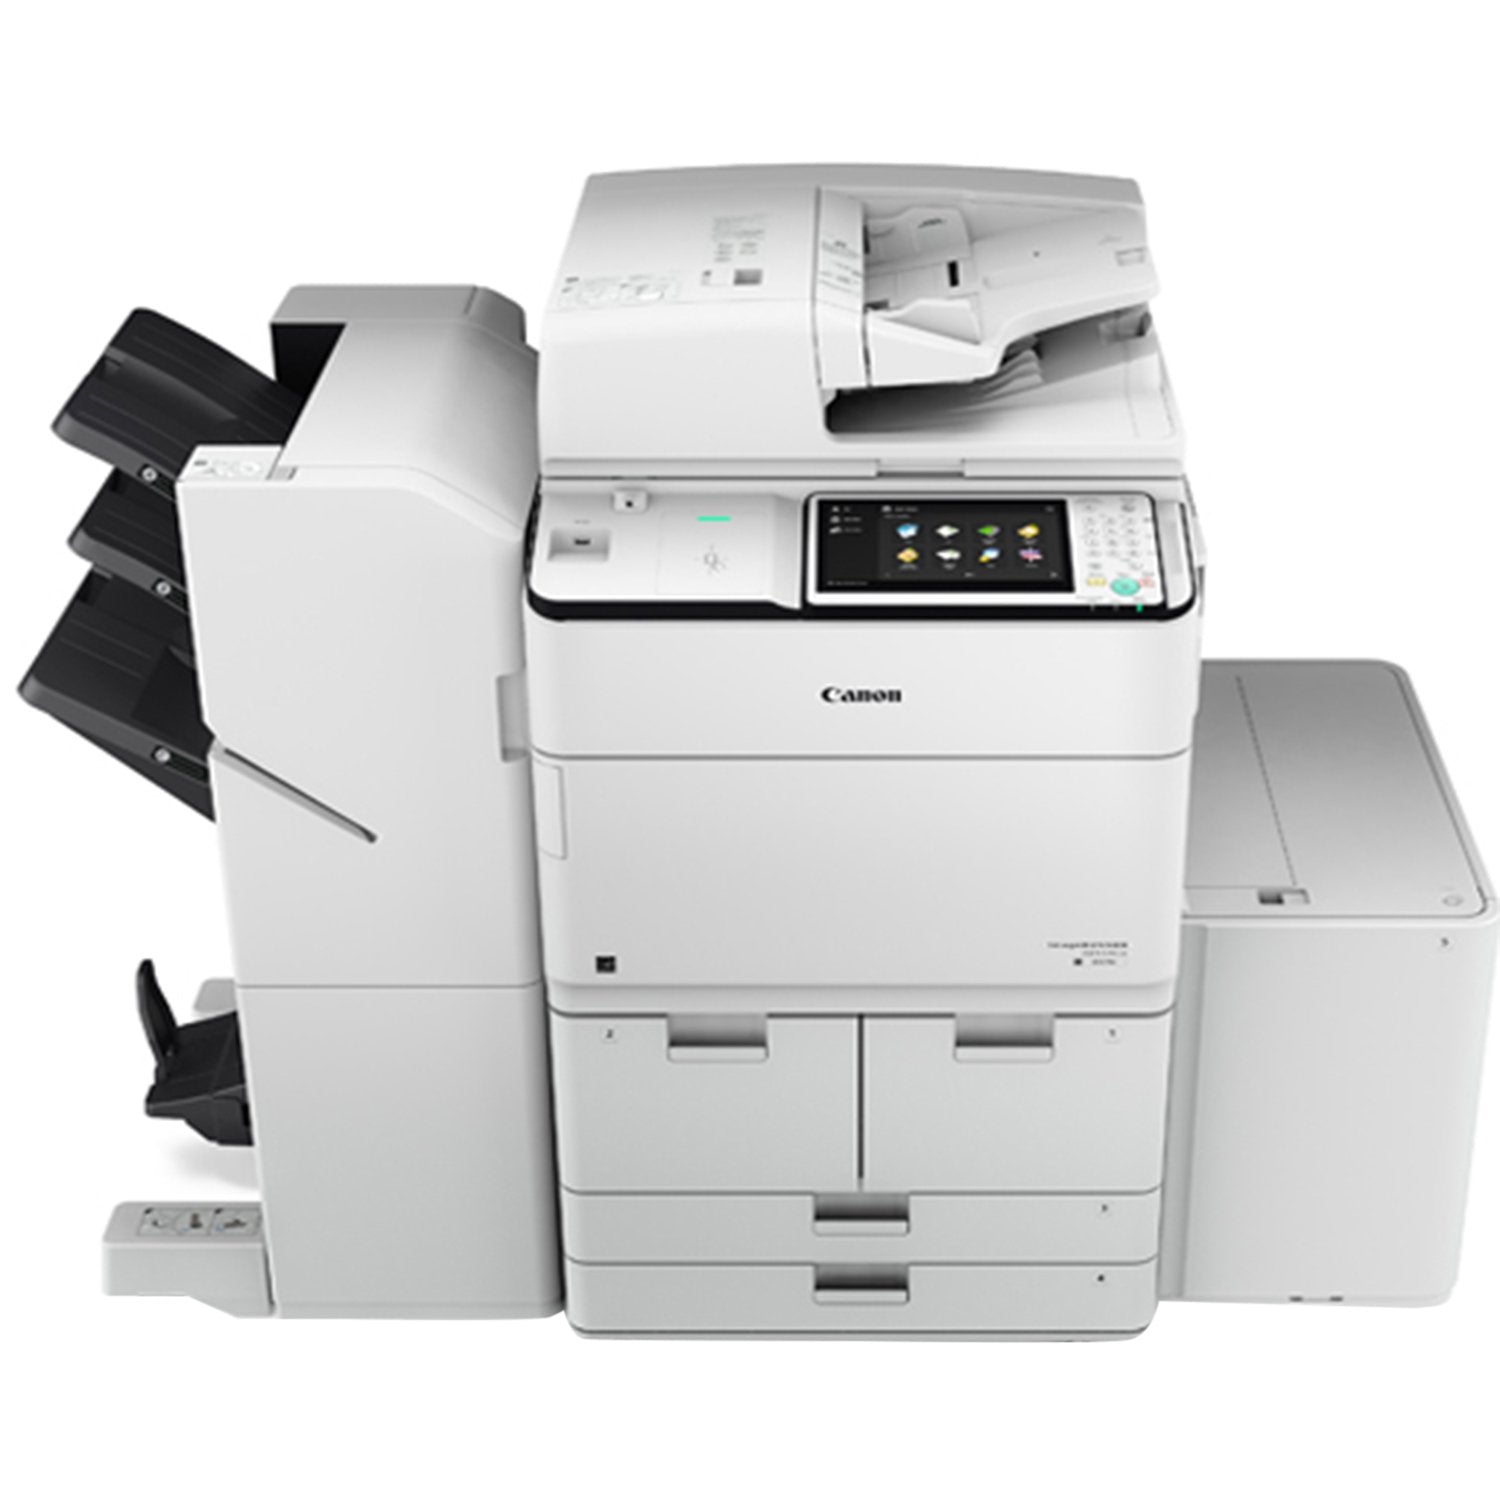 Absolute Toner Canon imageRUNNER ADVANCE 6555i Laser Multifunction Printer Copier For Office, IRA6555i Showroom Monochrome Copiers